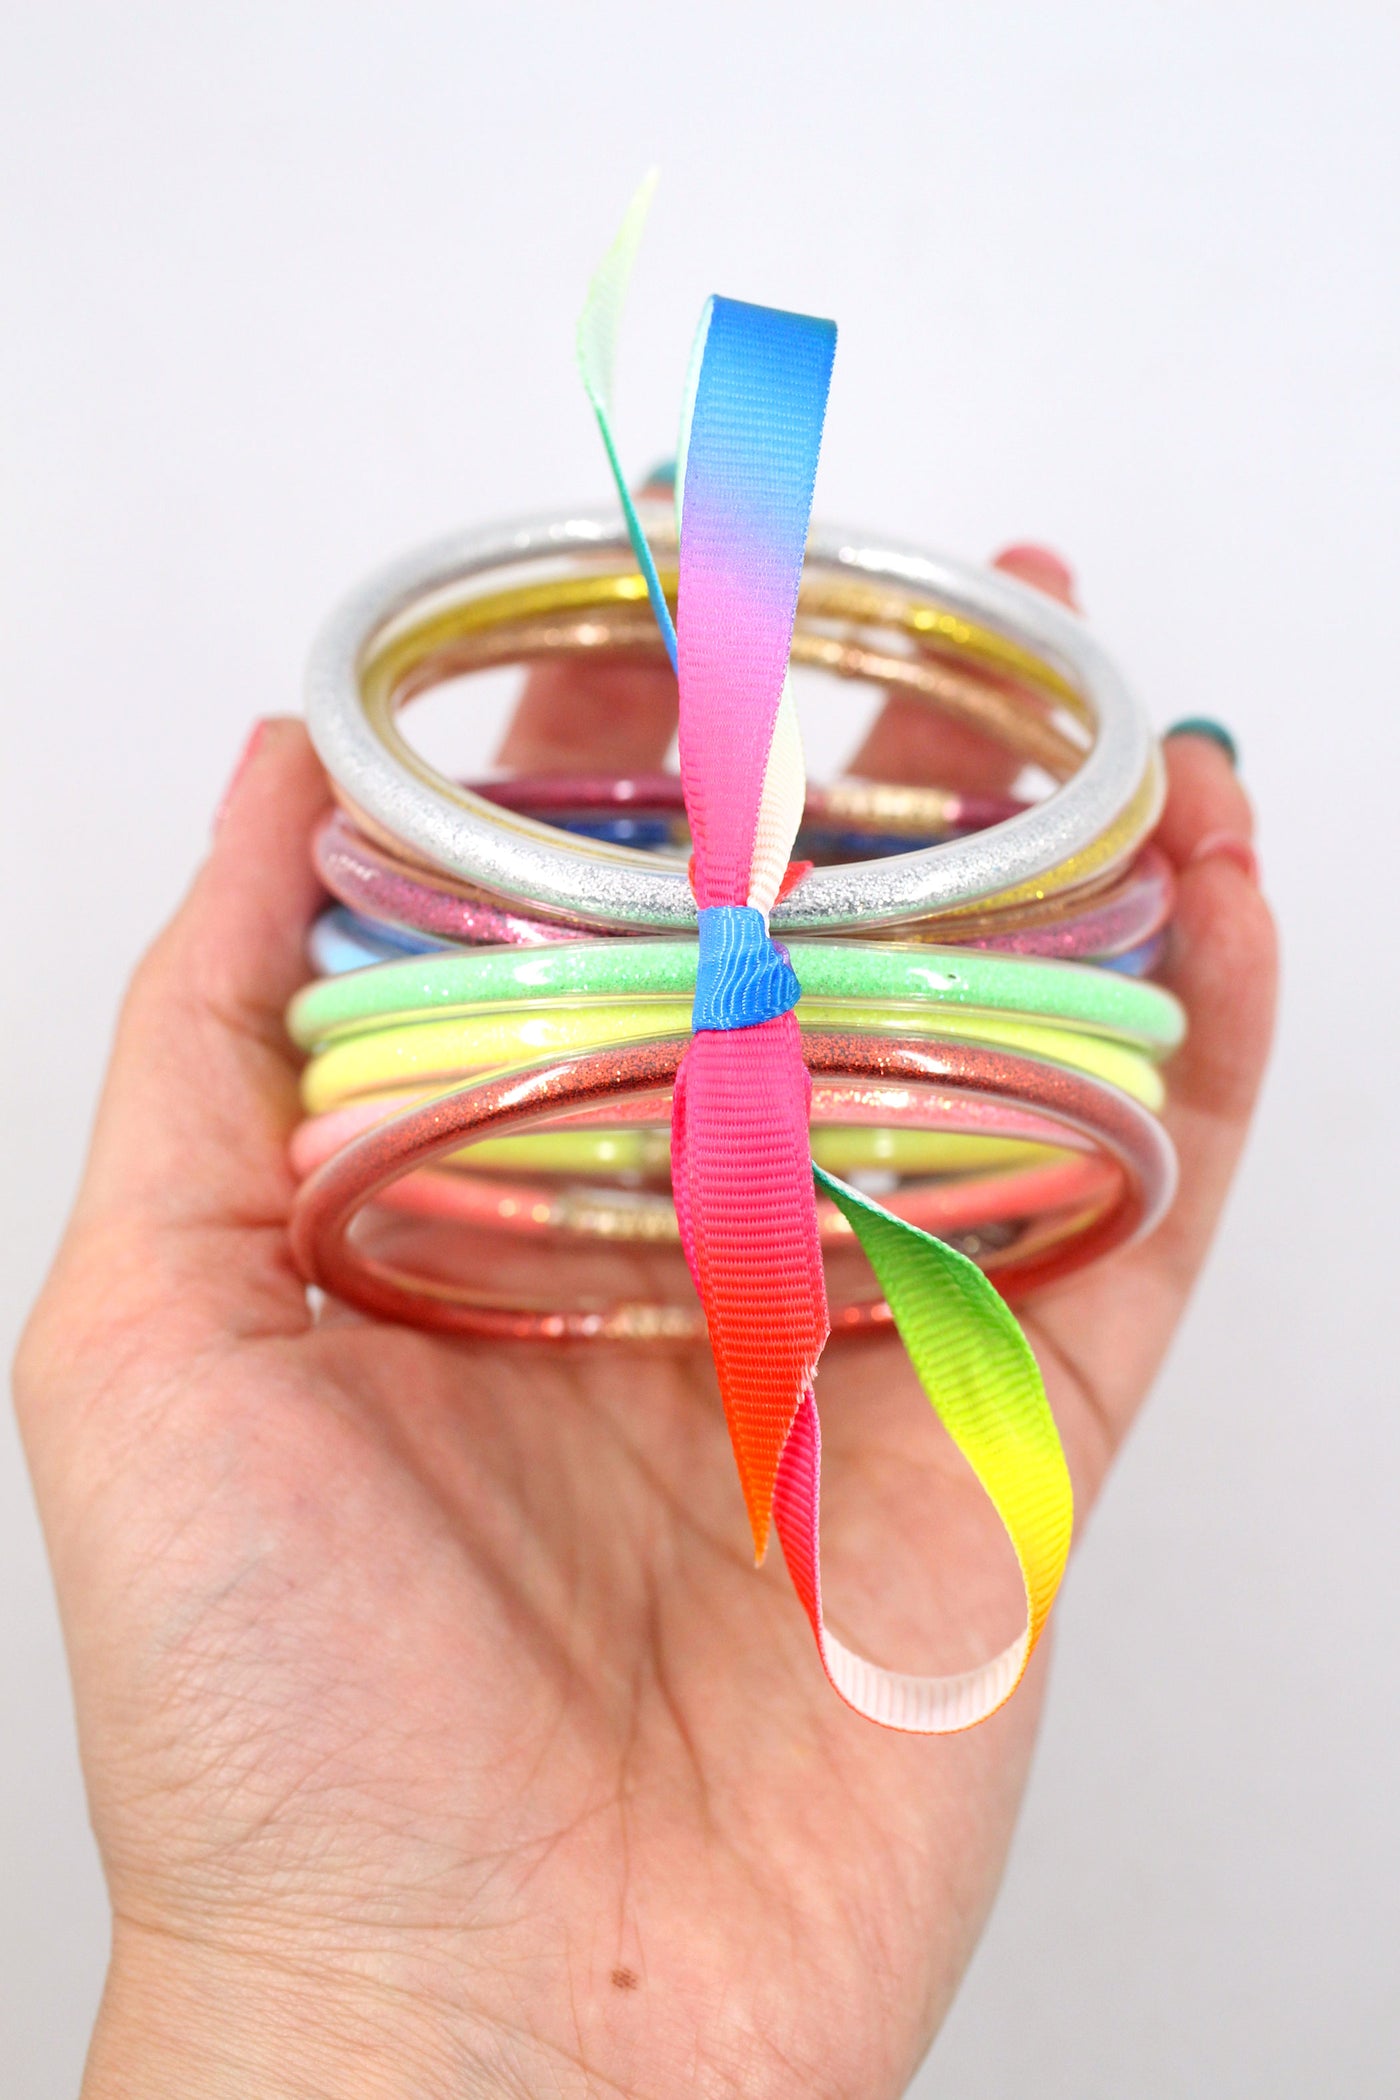 Glitter Plastic Jelly Glitter Bracelets With All Weather Bangles, Filled  With Silicone And Bowknot Jelly Perfect For Summer Fun! From Fashion12358,  $3.15